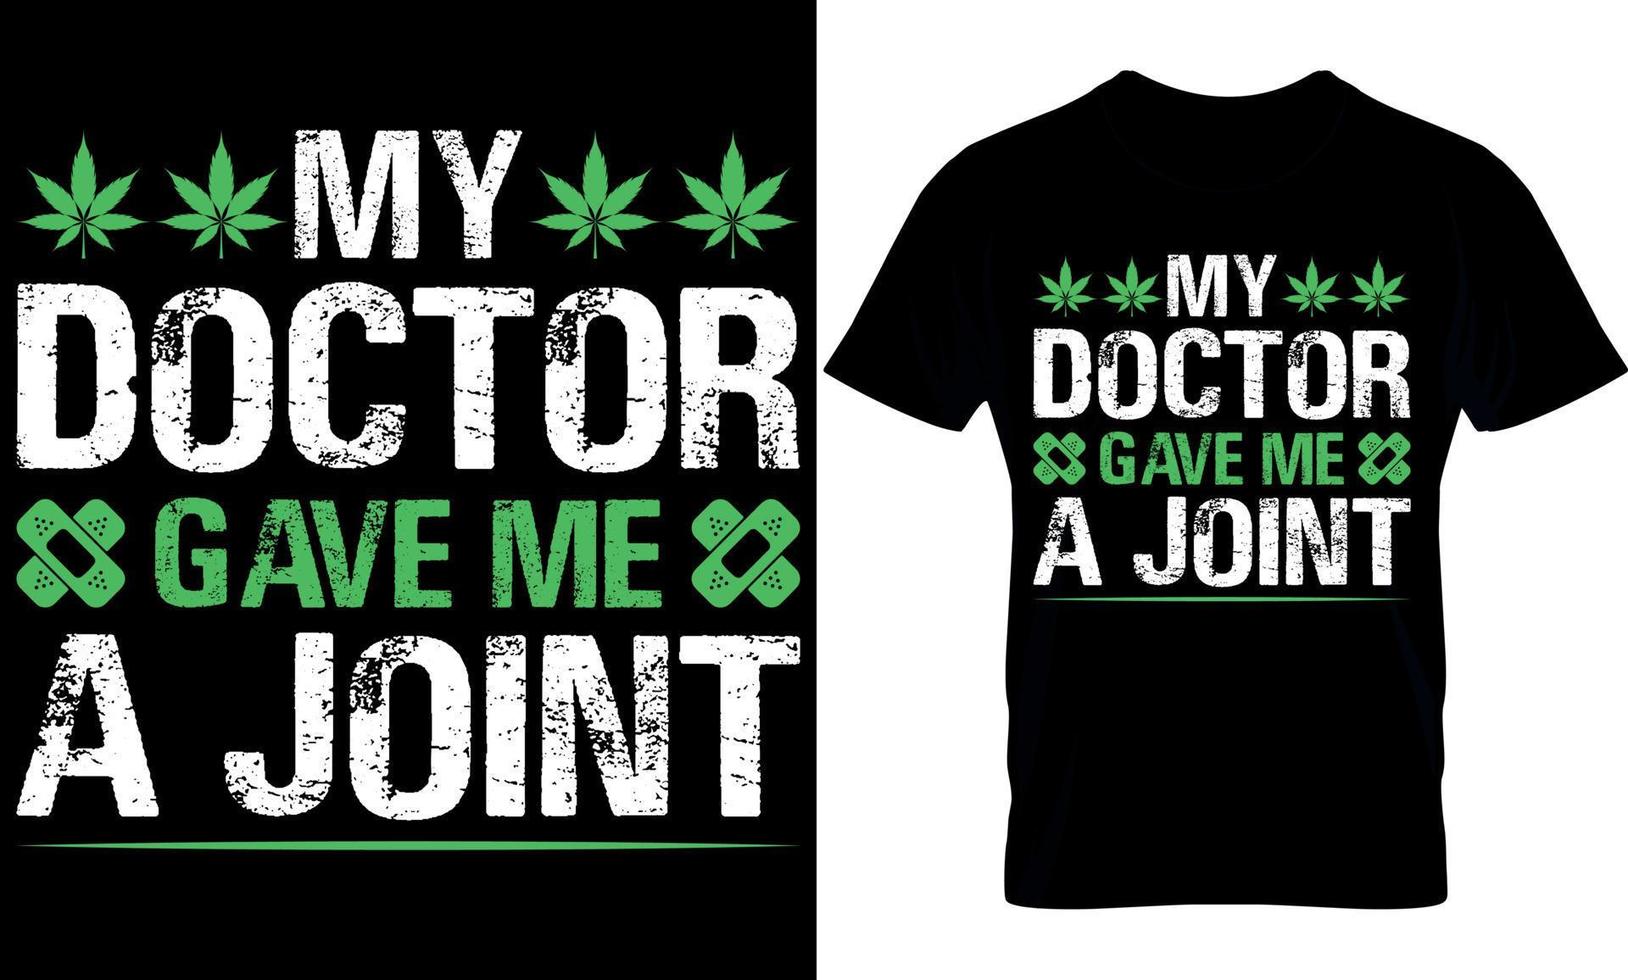 my doctor gave me a joint. cannabis typography t shirt Design. weed t-shirt design. weed t shirt design. cannabis t-shirt design. cannabis t shirt design. weed design. vector